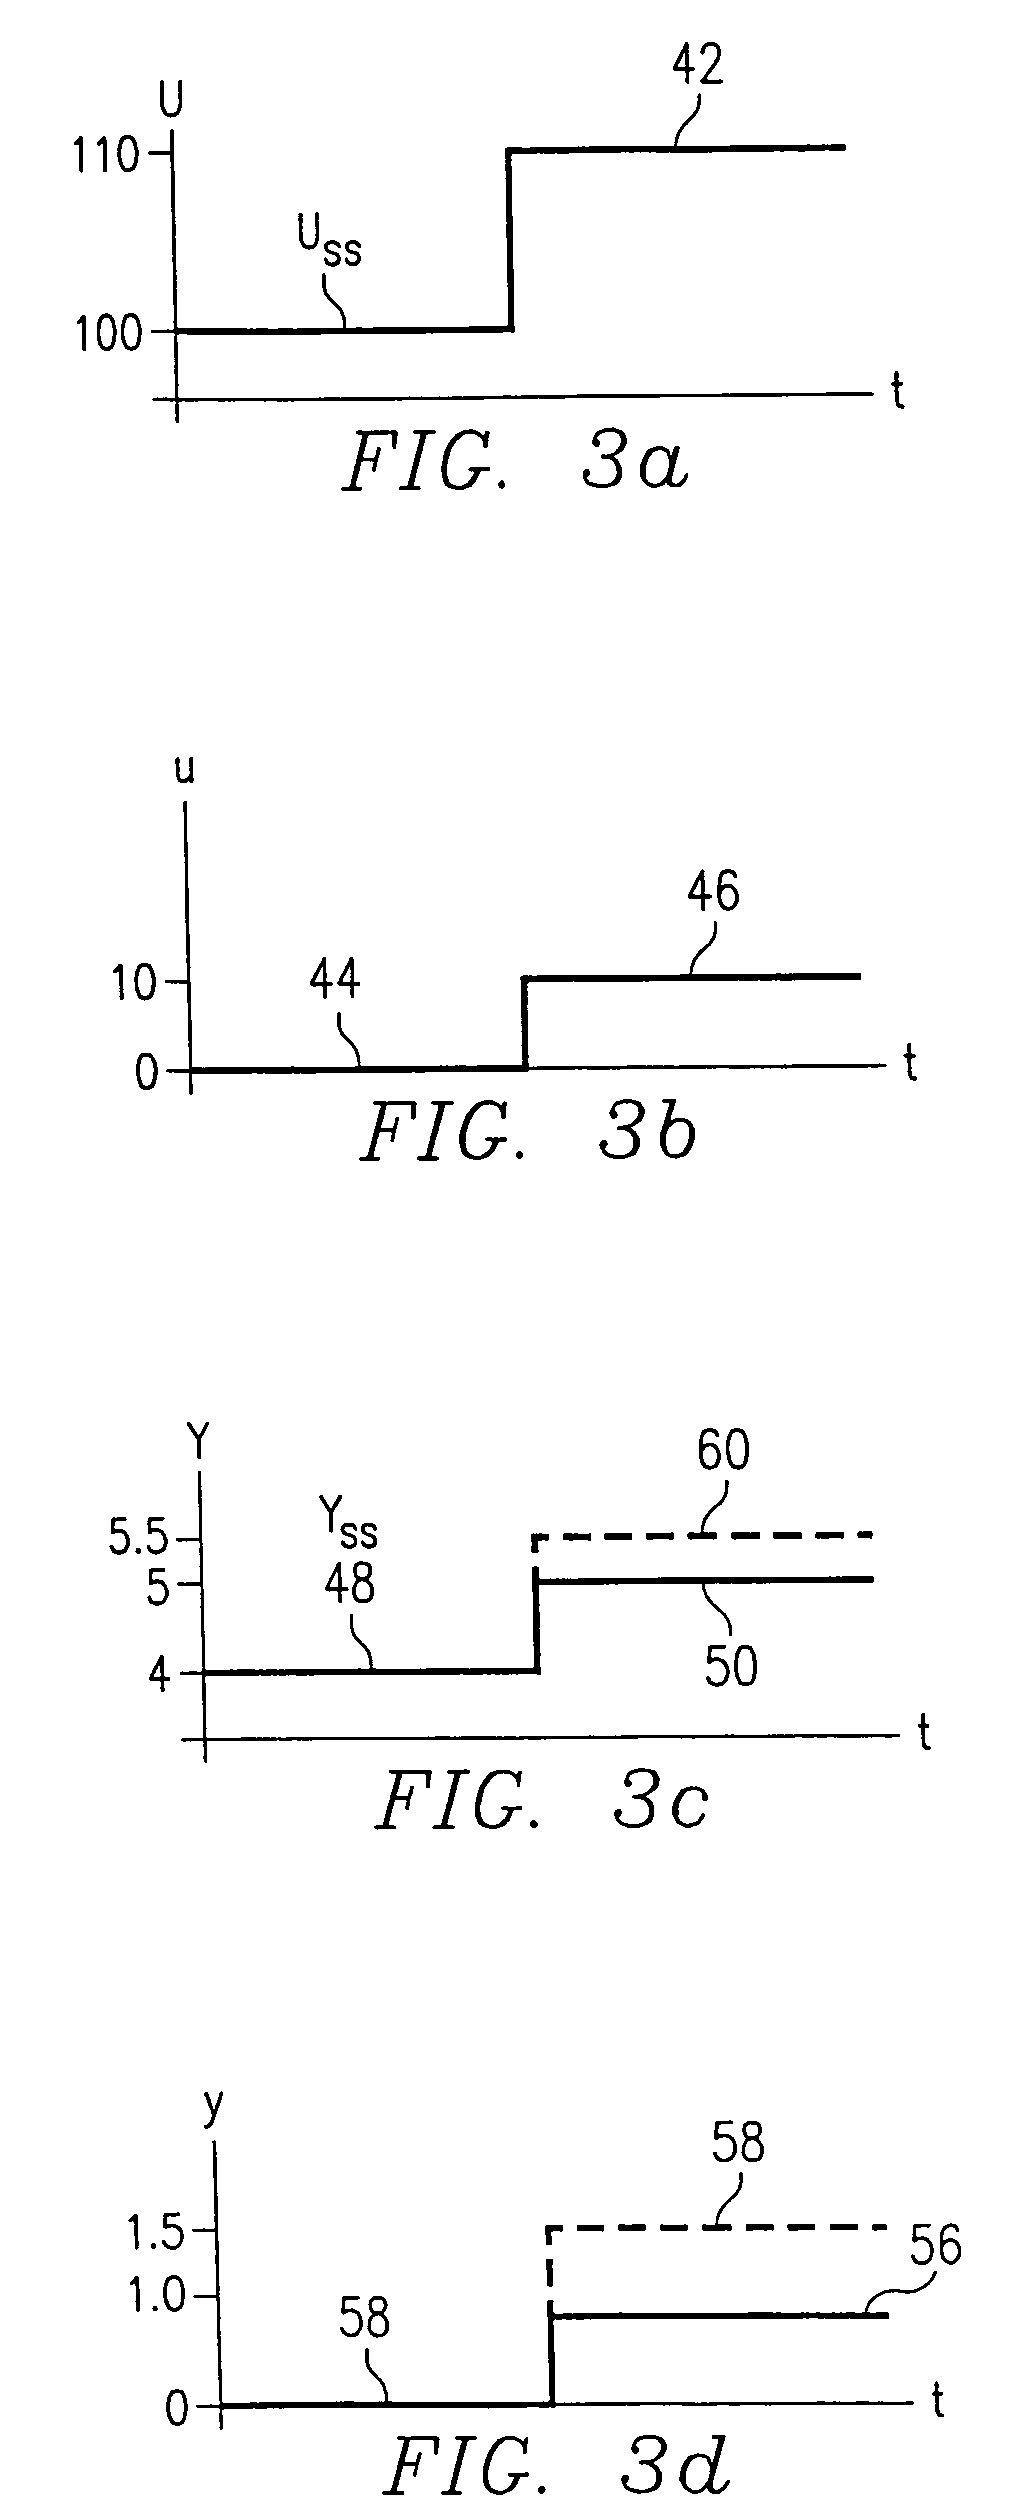 Method and apparatus for attenuating error in dynamic and steady-state processes for prediction, control, and optimization